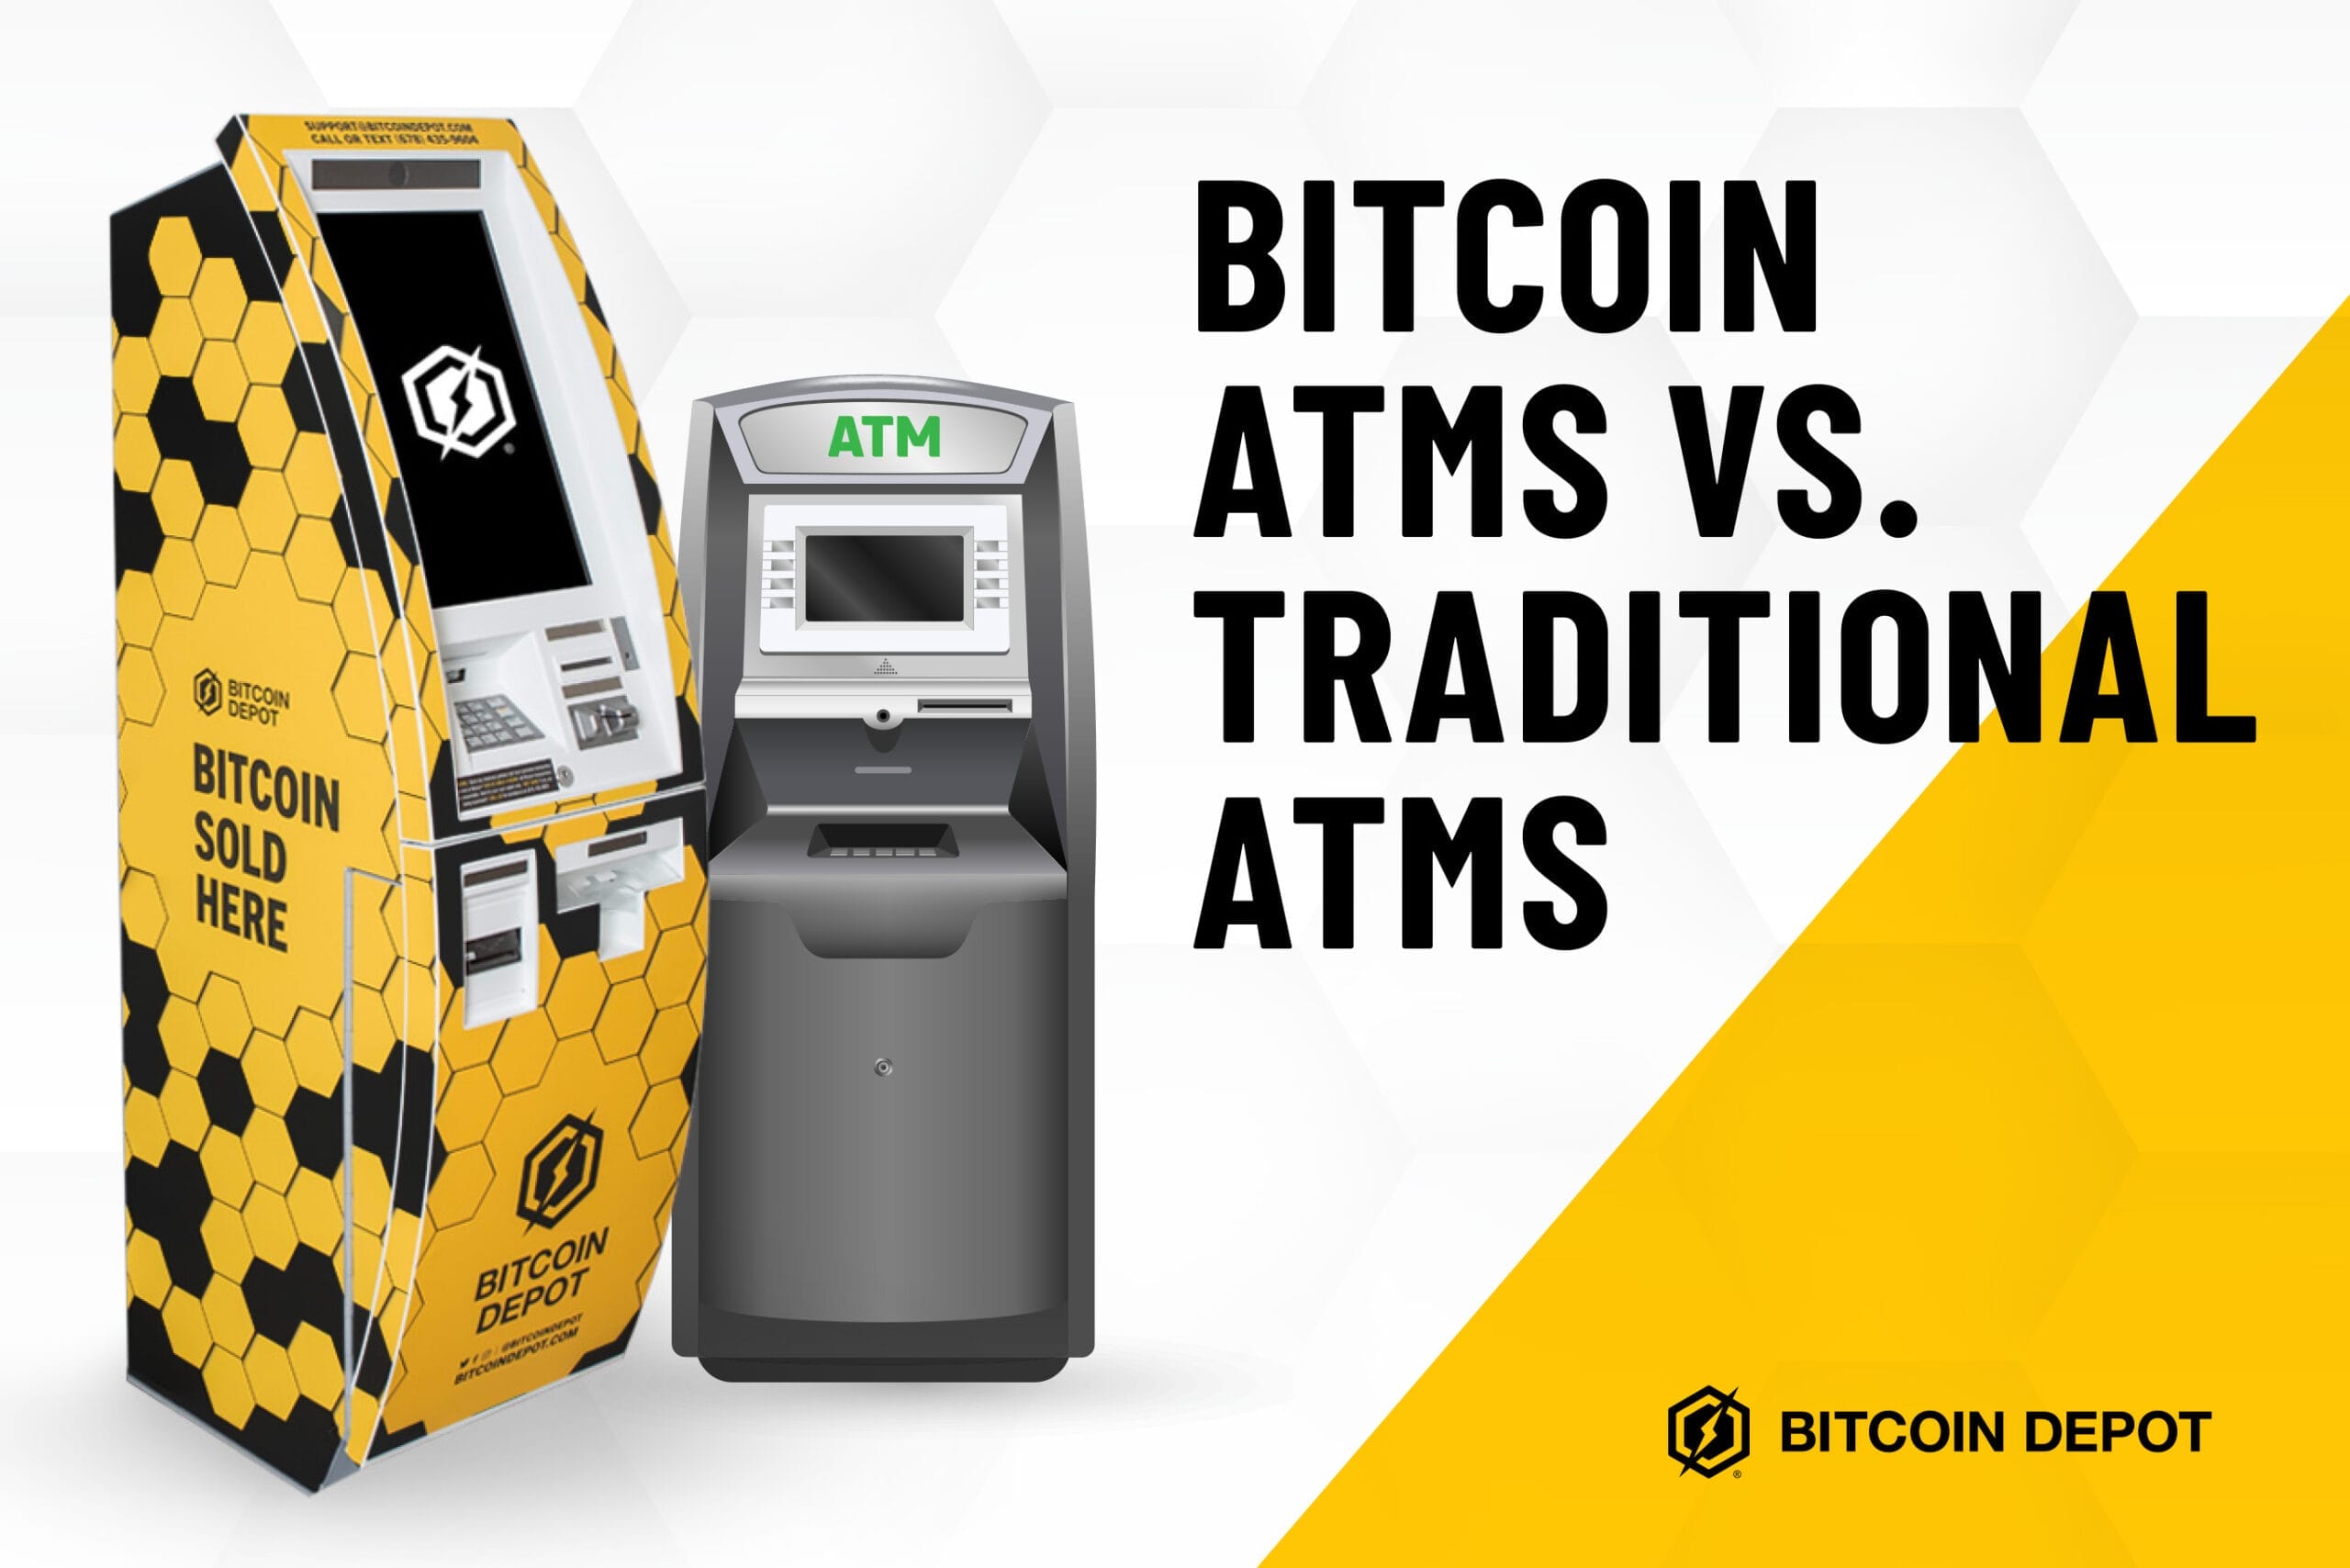 Bitcoin ATMs vs. Traditional ATMs